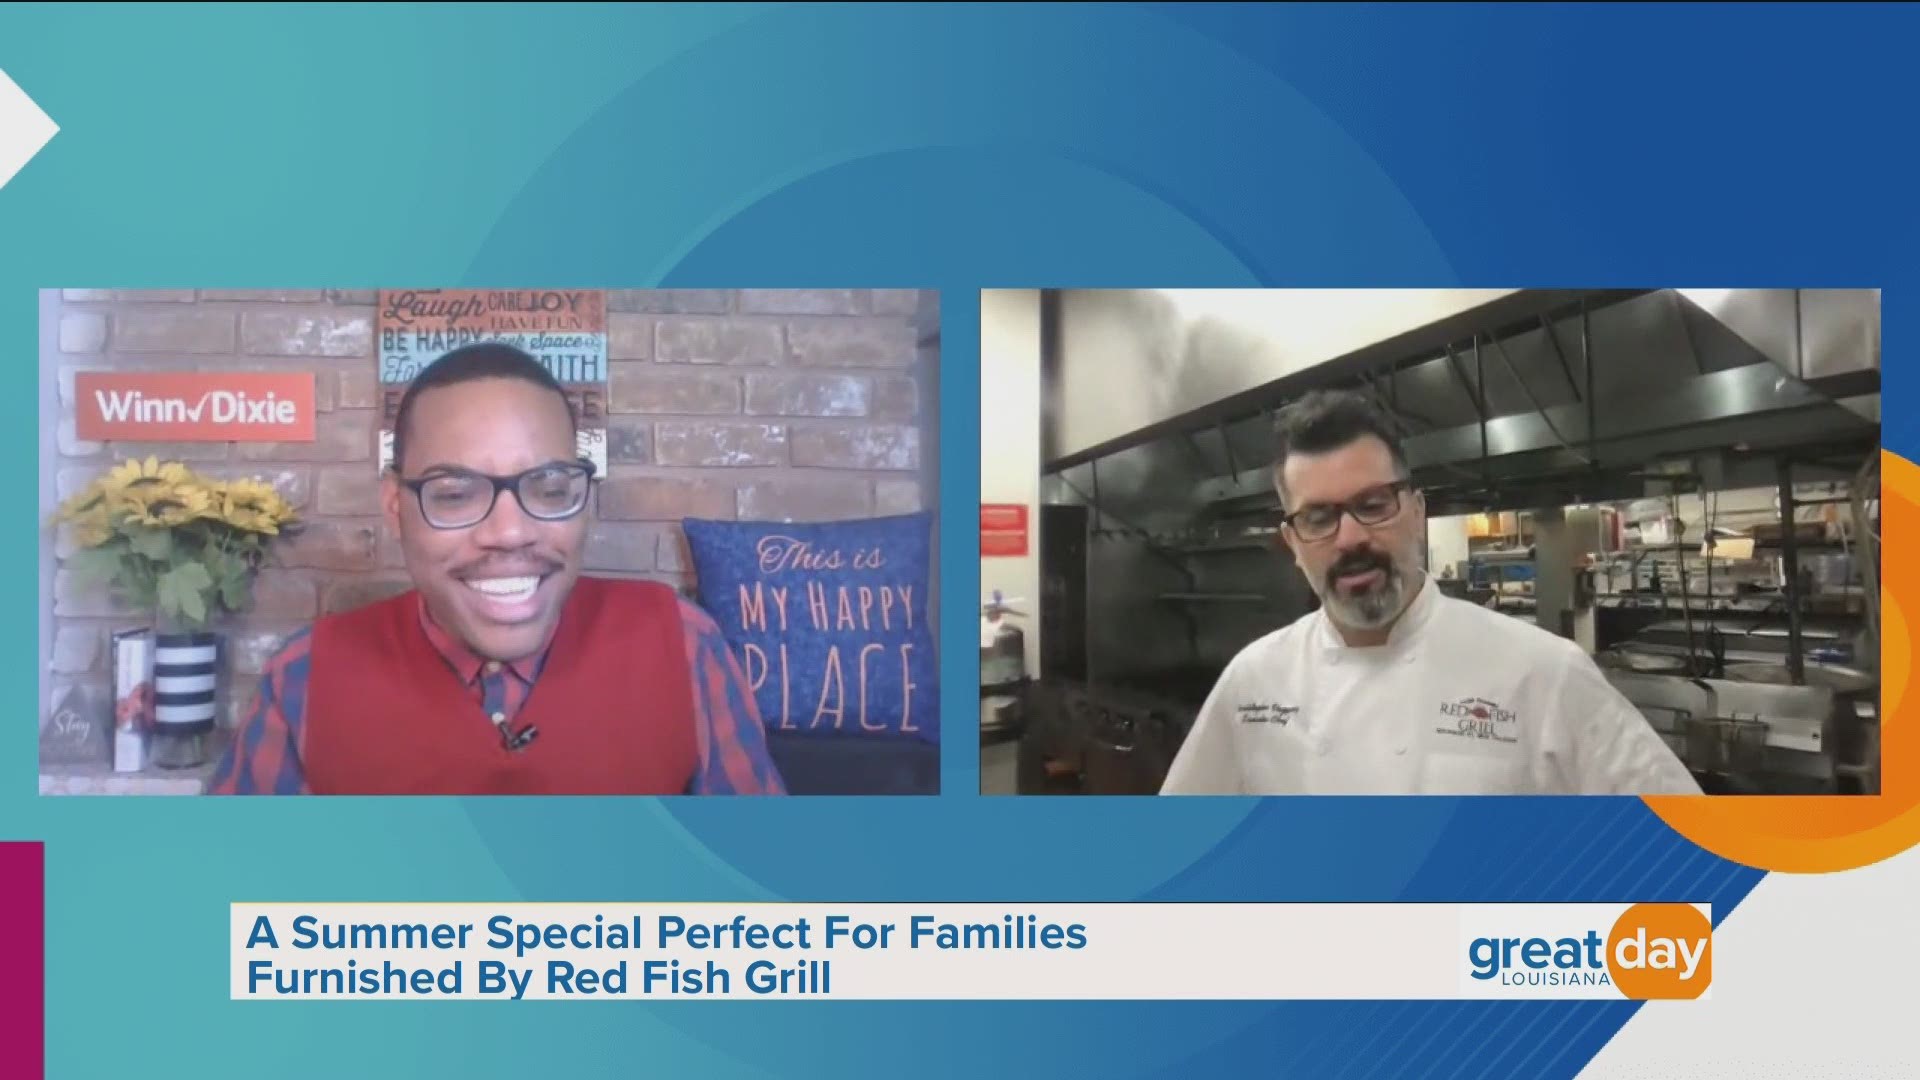 The executive chef of Red Fish Grill shared details about their summer specials for kids and prepared a fried shrimp dish.